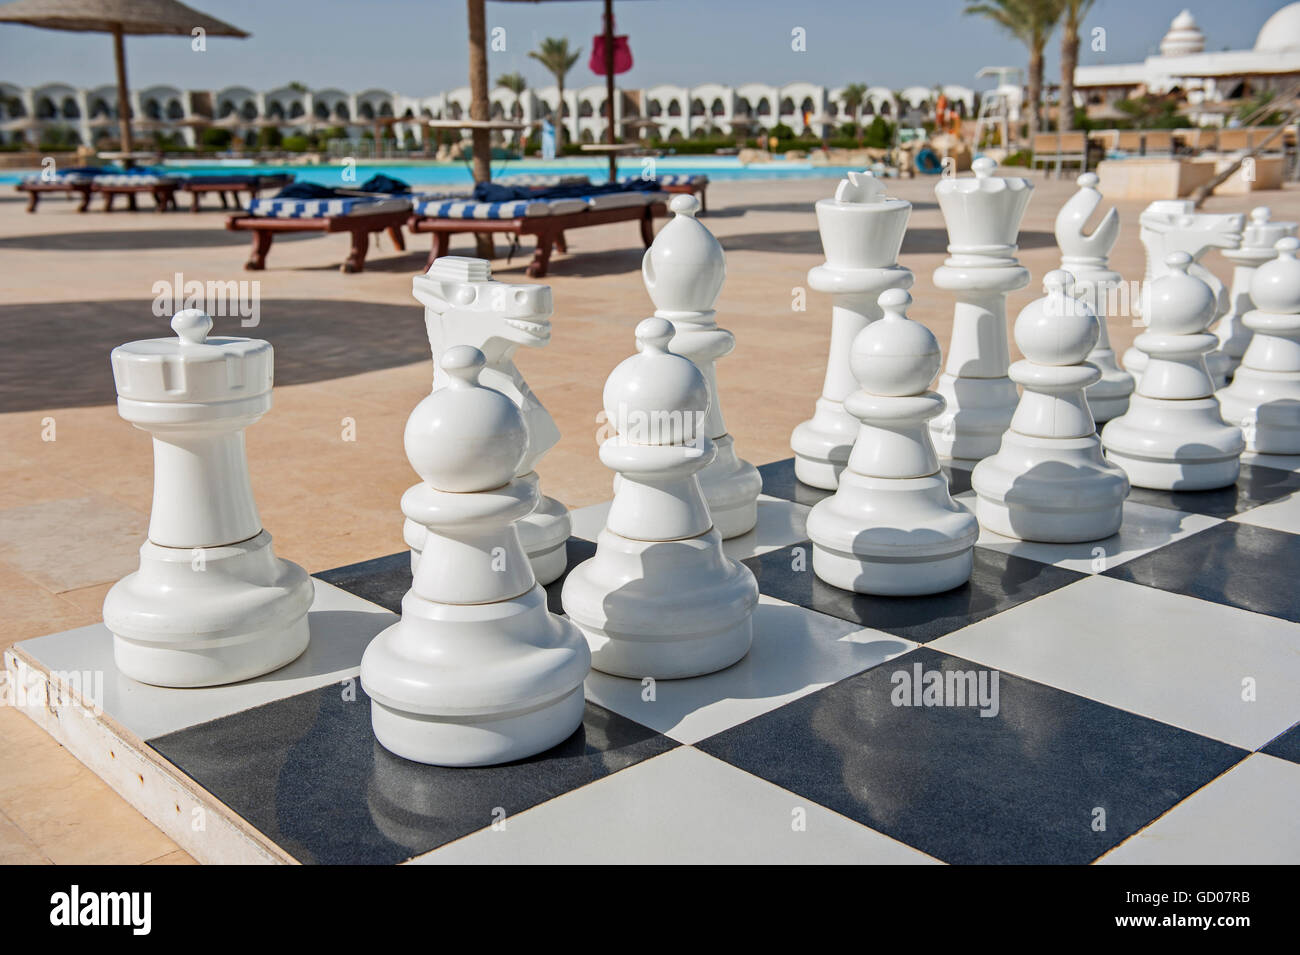 Closeup of playing pieces on giant chess boards game in tropical hotel resort with swimming pool Stock Photo